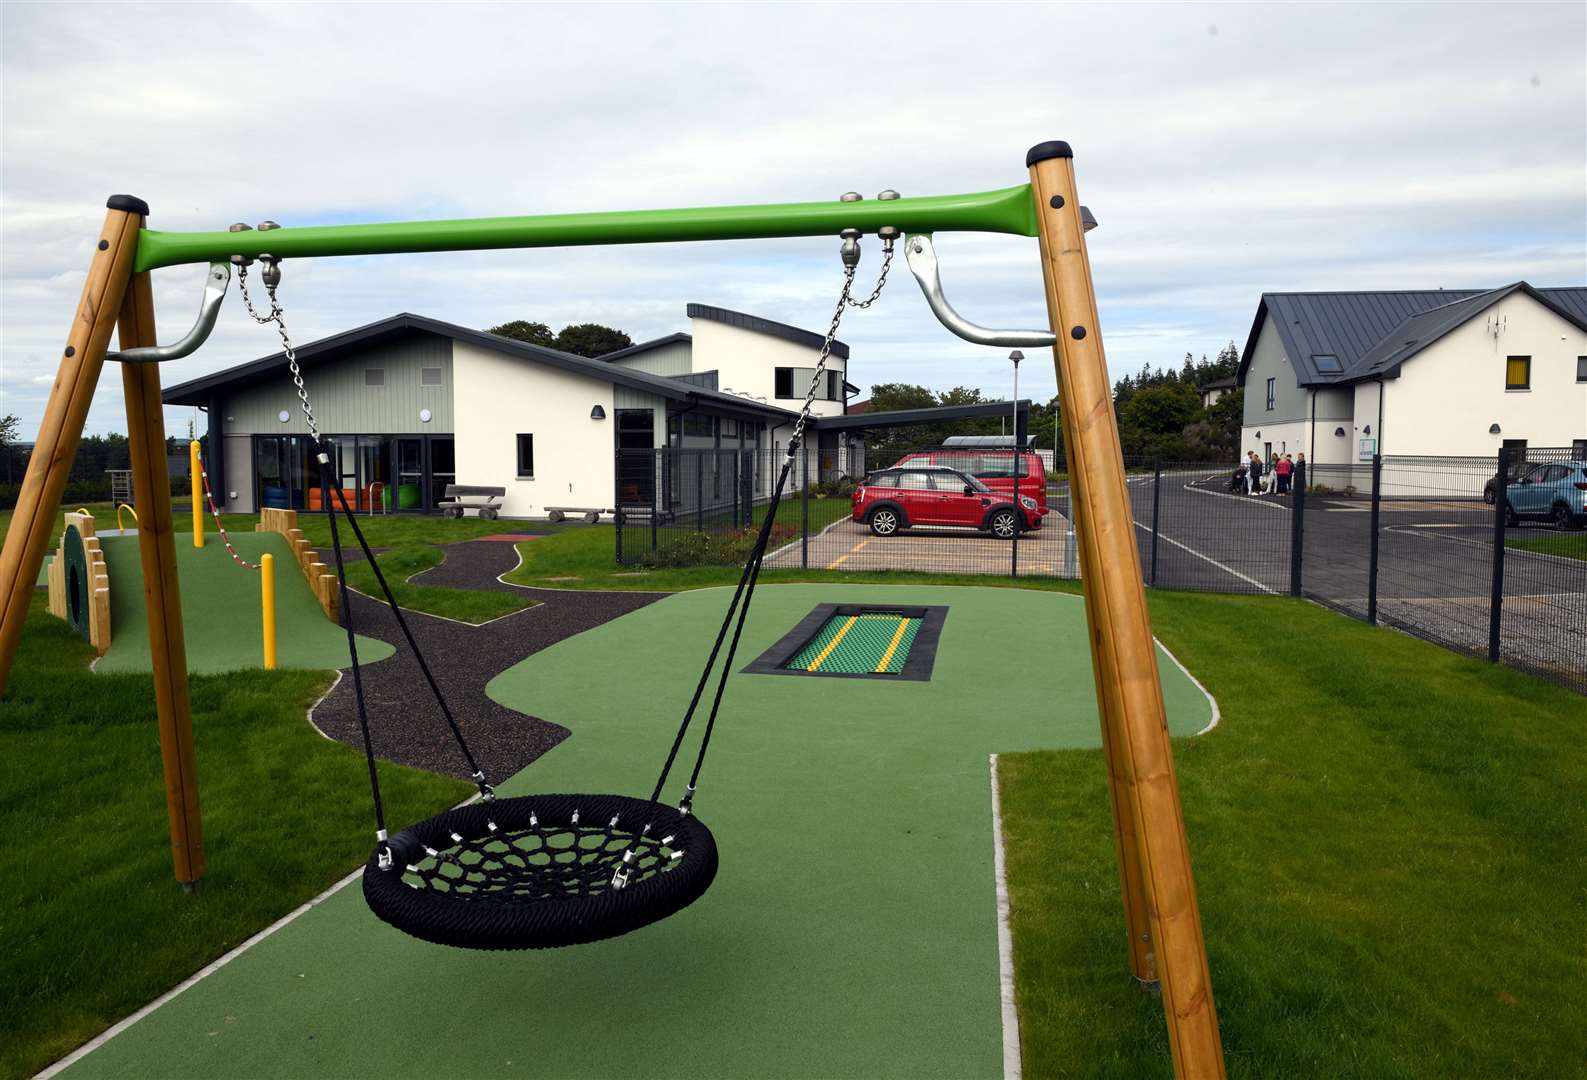 The centre's facilities include a play area.